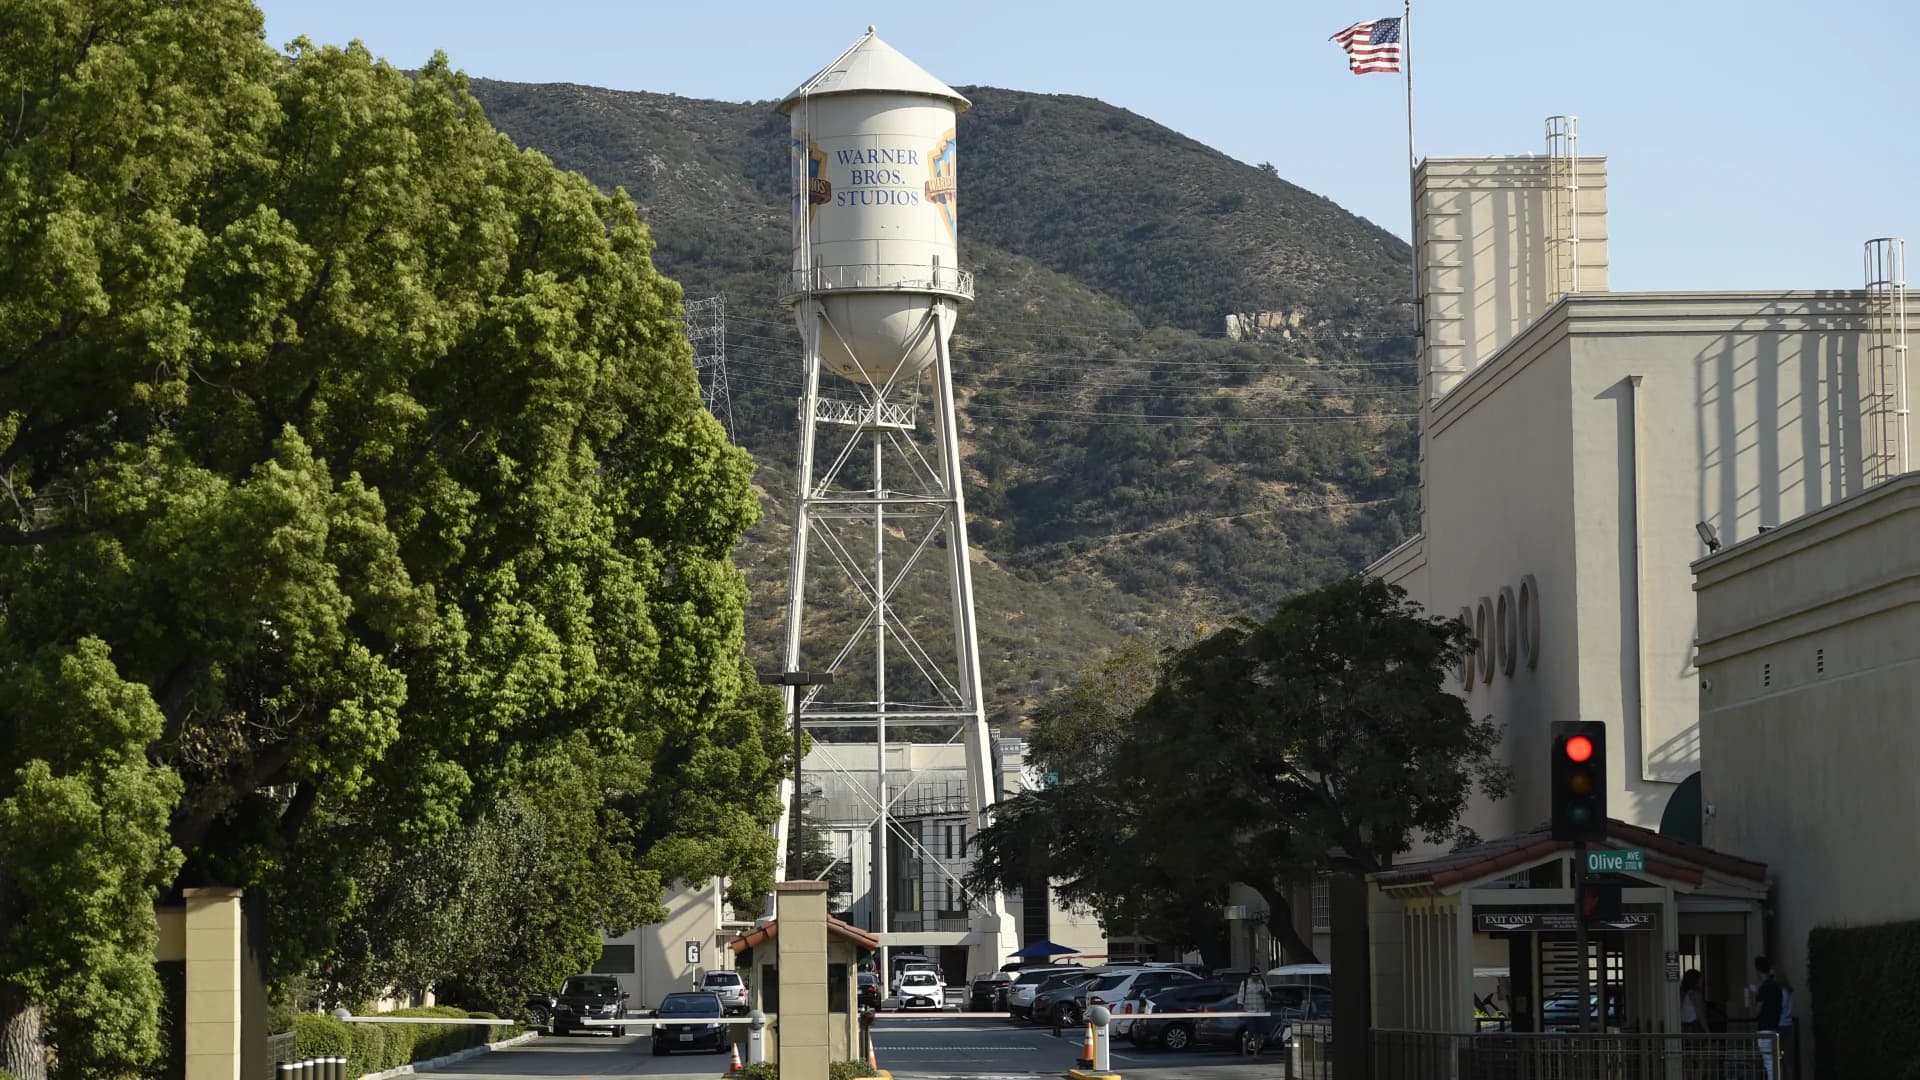 Visit the Warner Bros. Studio virtually with these 7 tour videos